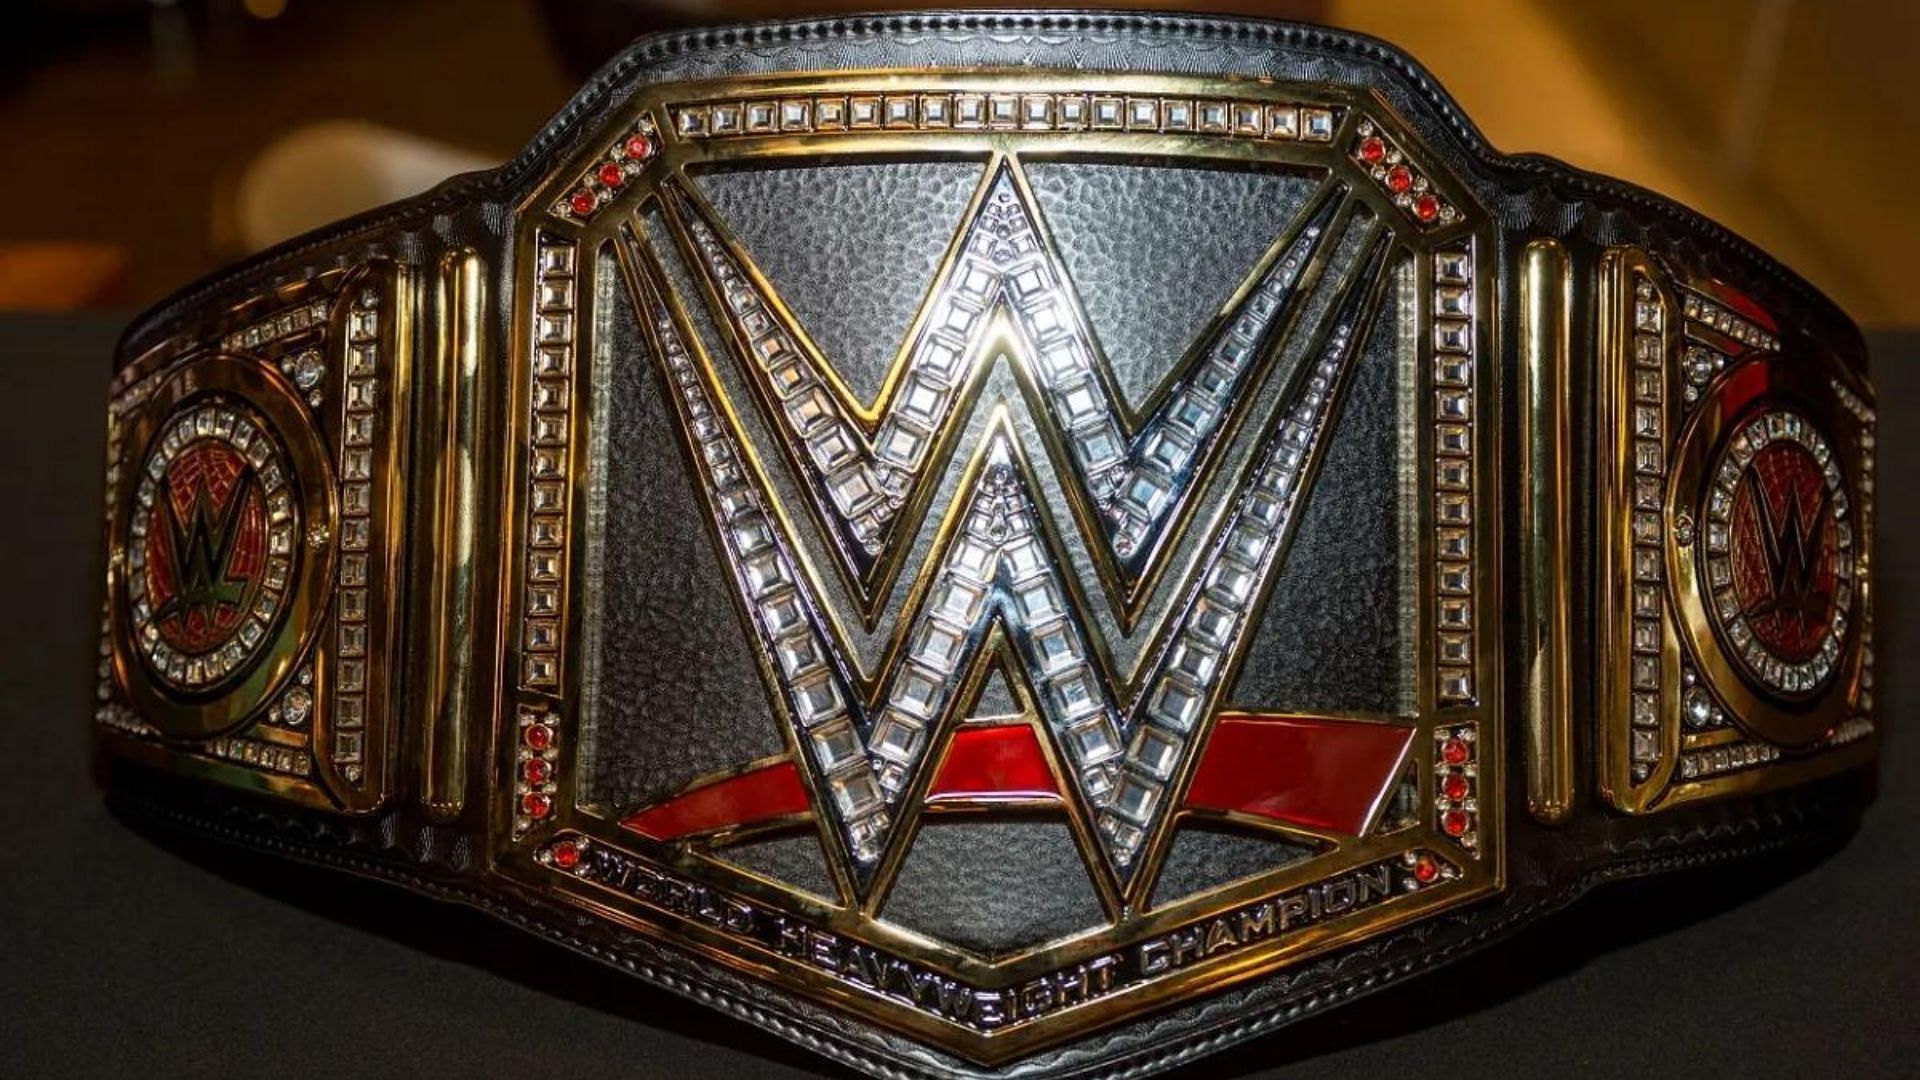 The WWE Championship is one of the top prizes in the promotion